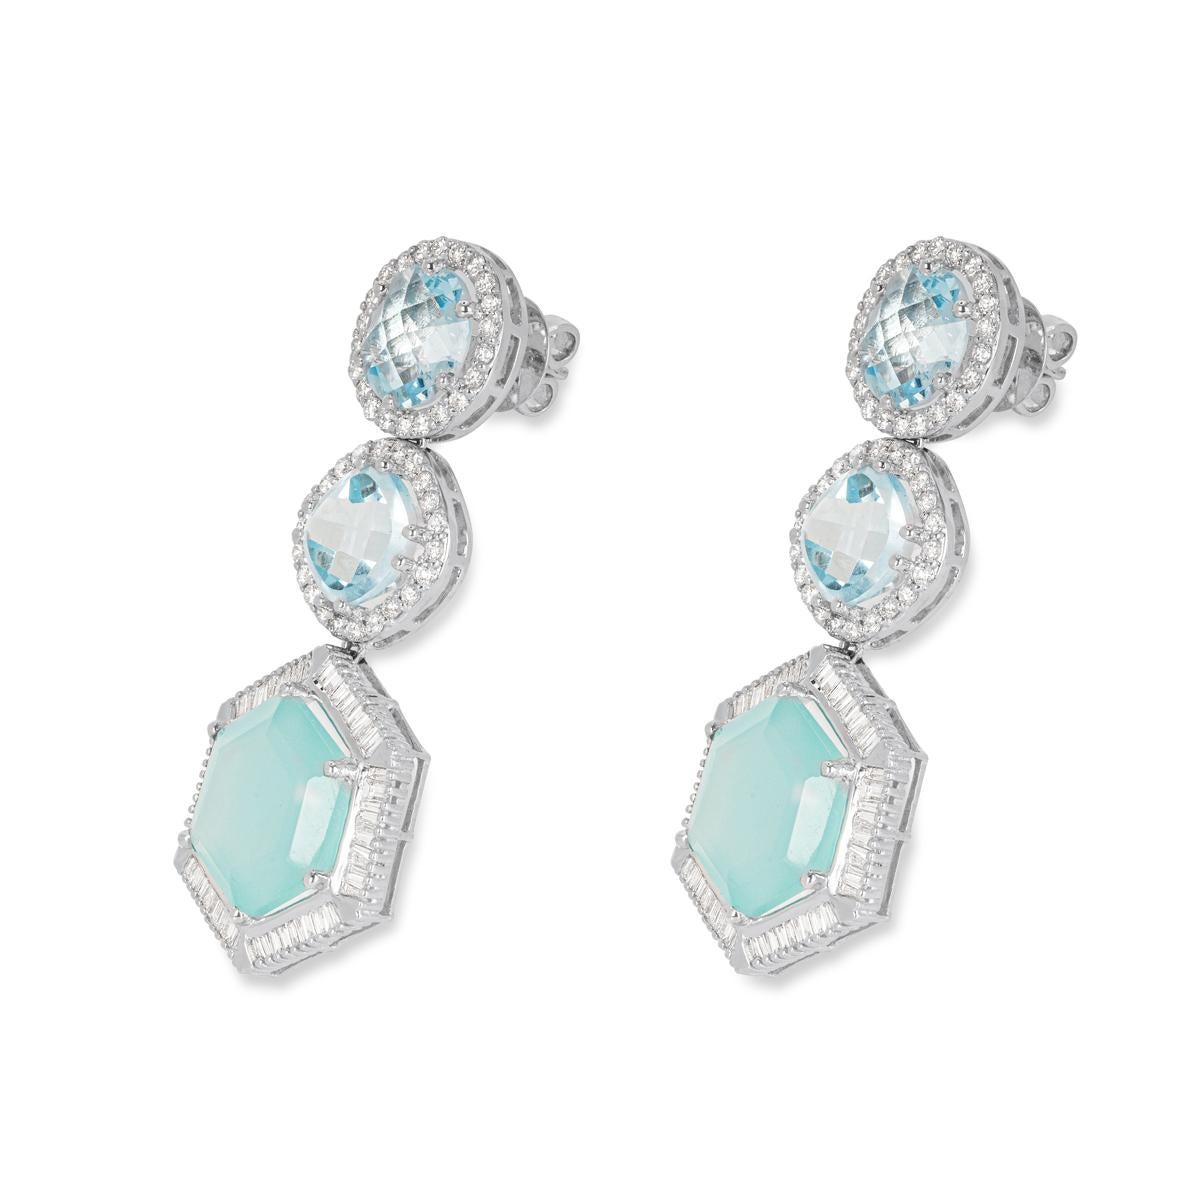 A unique pair of 14k white gold diamond and topaz drop earrings. The earrings each comprises of a round cut, cushion cut and a multi-faceted topaz vertically placed with a halo of diamonds around each. The topaz has a total weight of 35.30ct with a